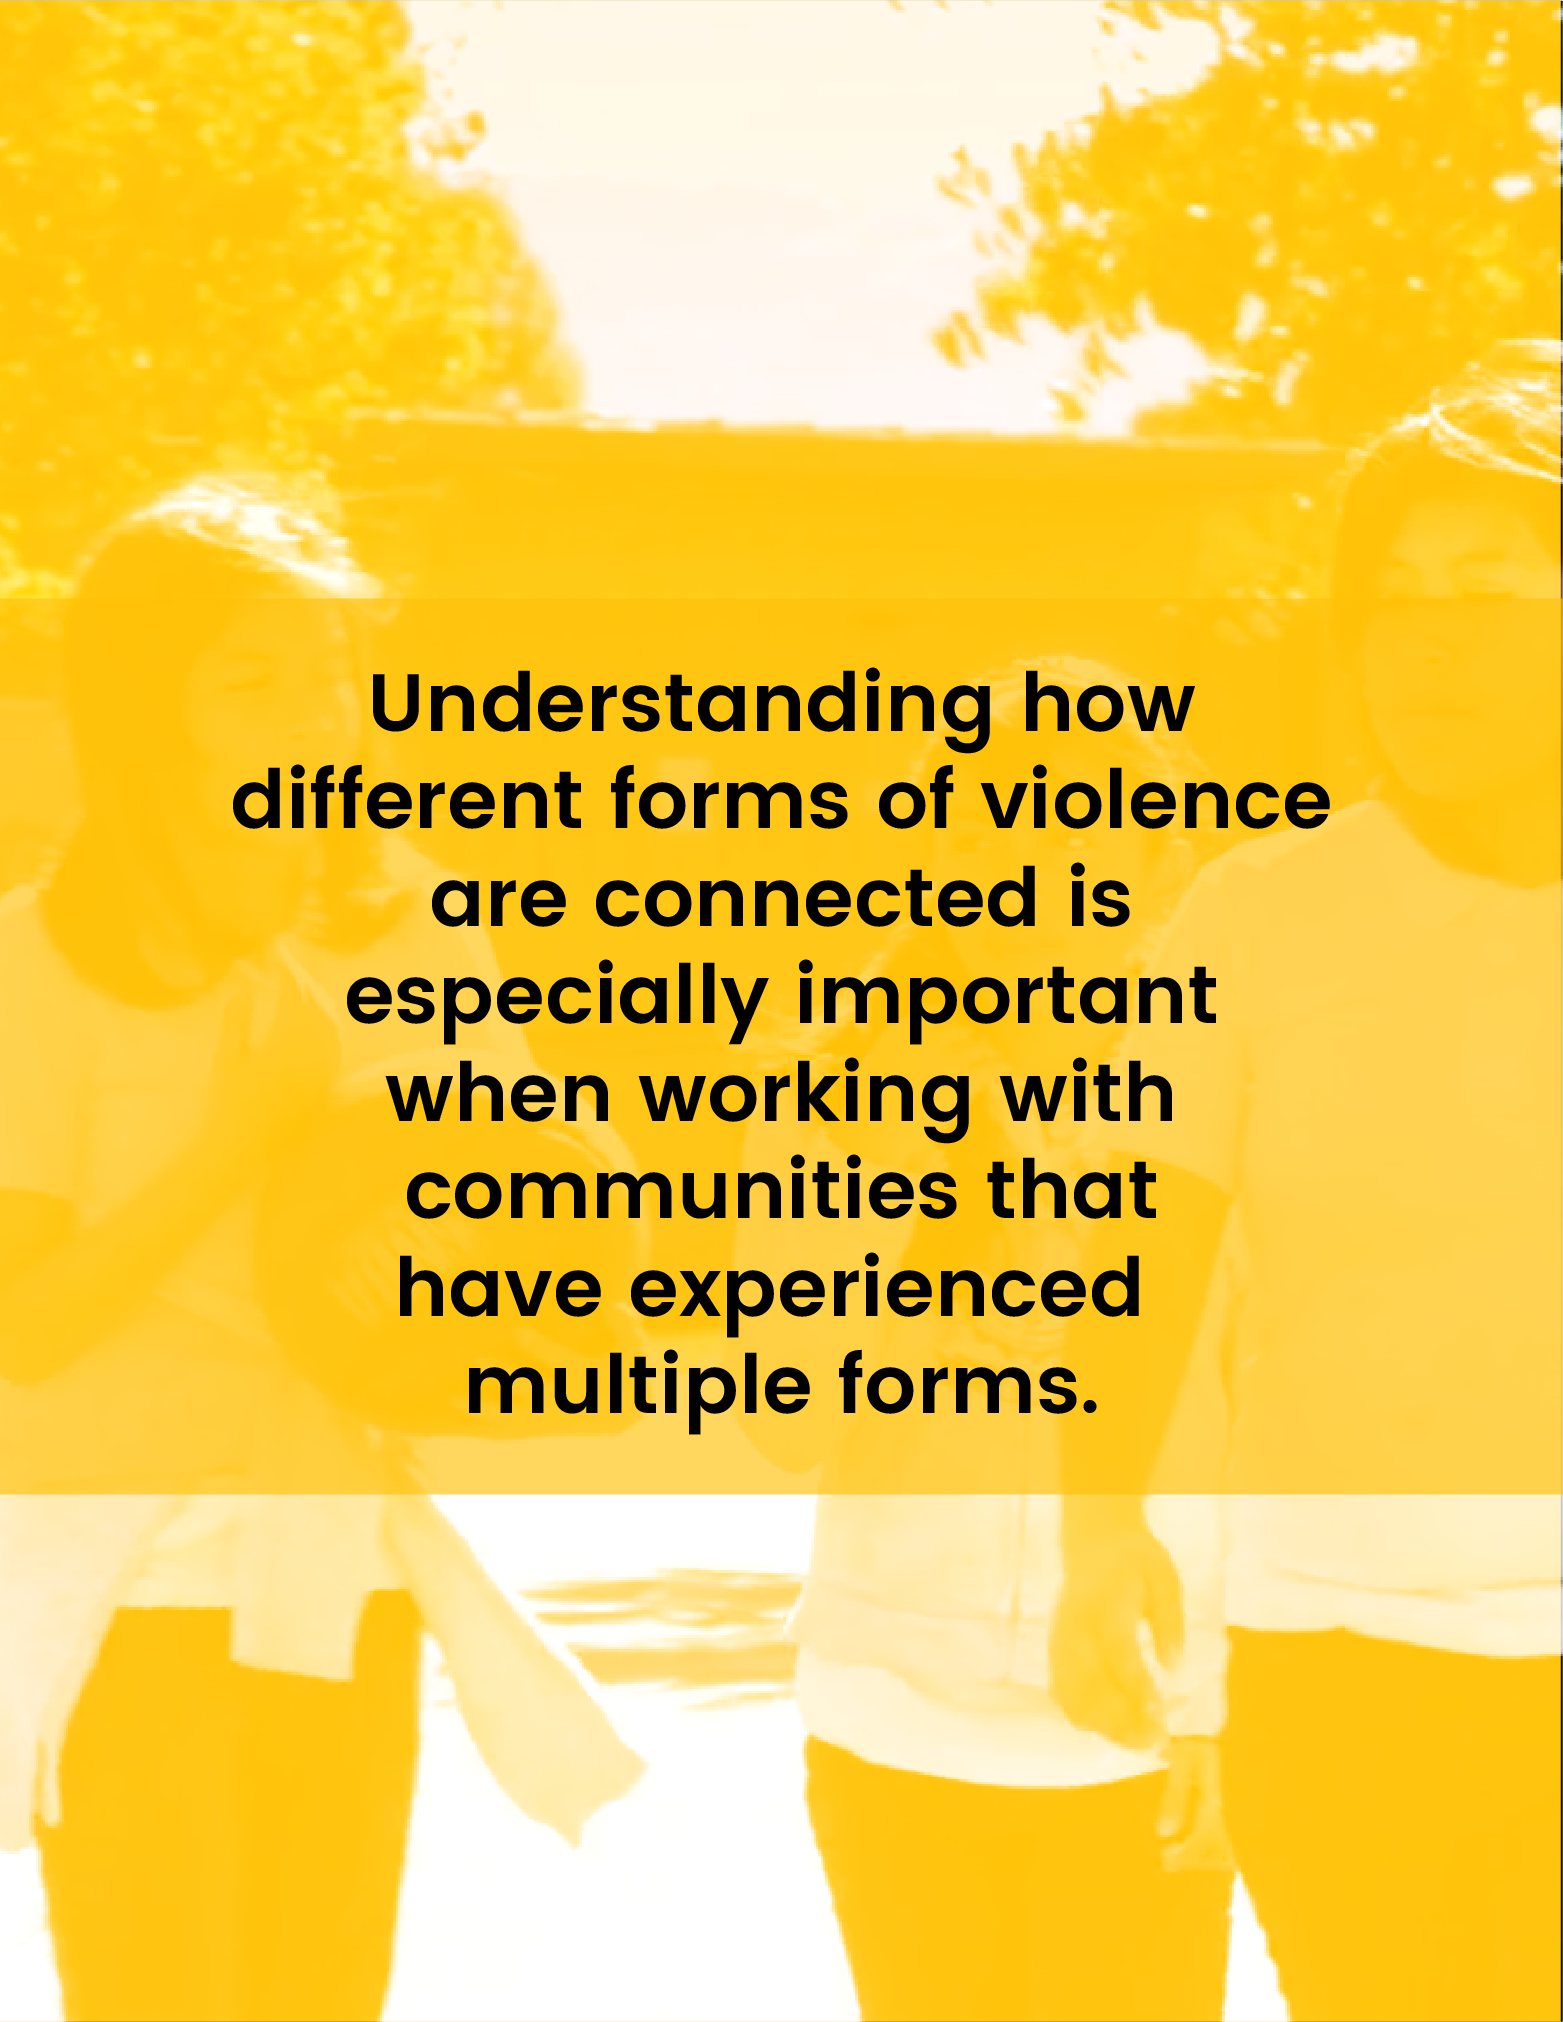 Understanding how different forms of violence are connected is especially important when working with communities and people at high risk for experiencing multiple forms of violence (e.g. youth)